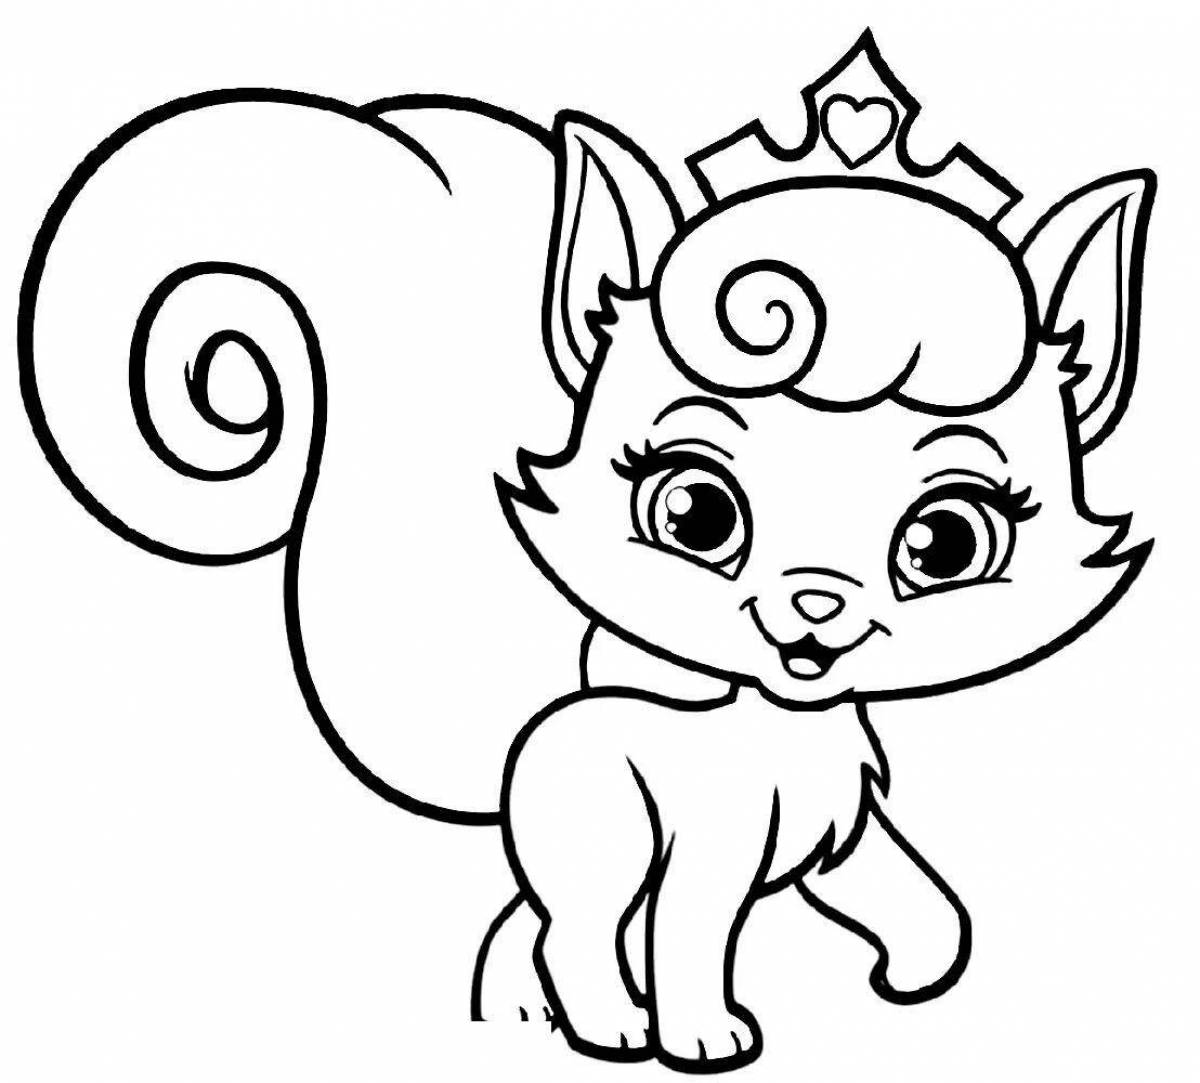 Sweet cat and dog coloring pages for kids